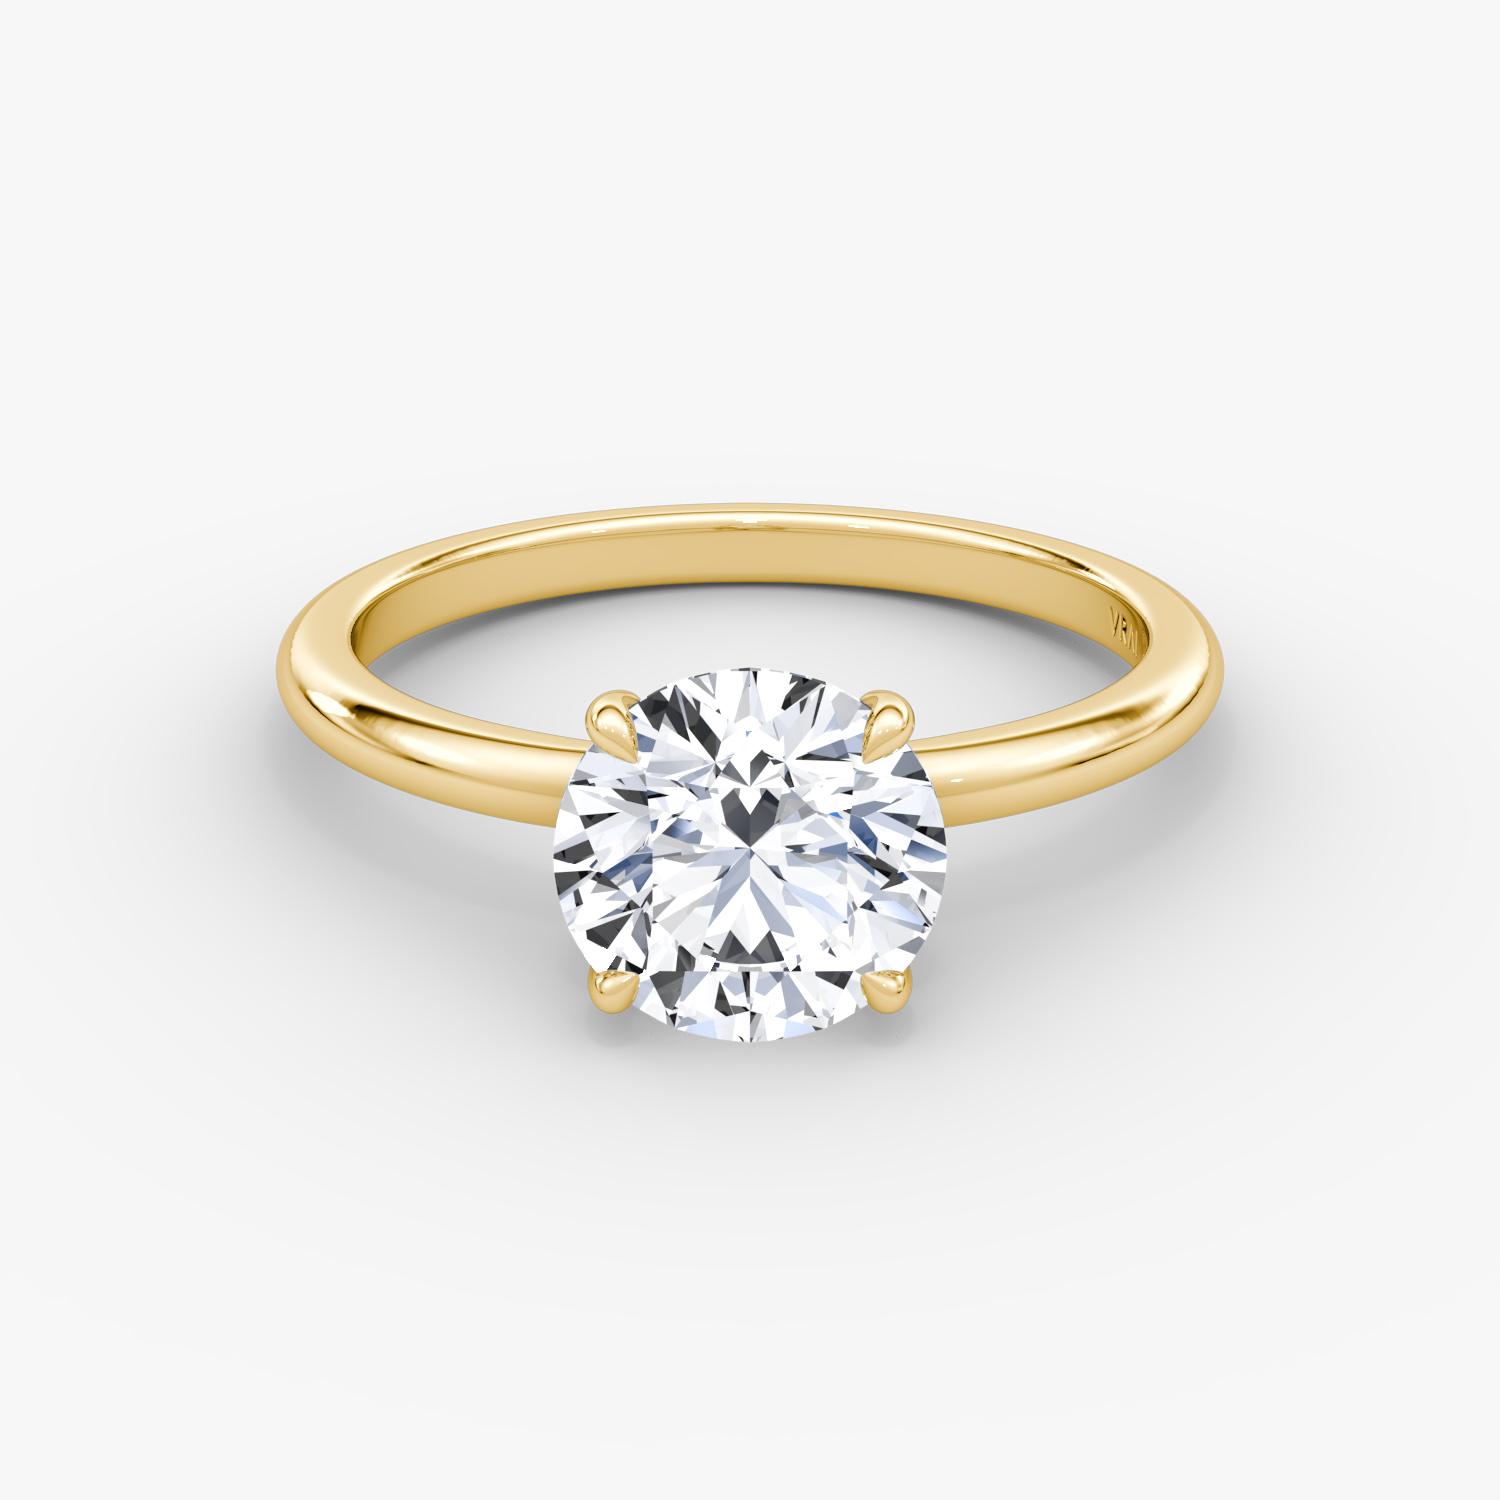 Beginner's Guide to Engagement Ring Styles and Settings